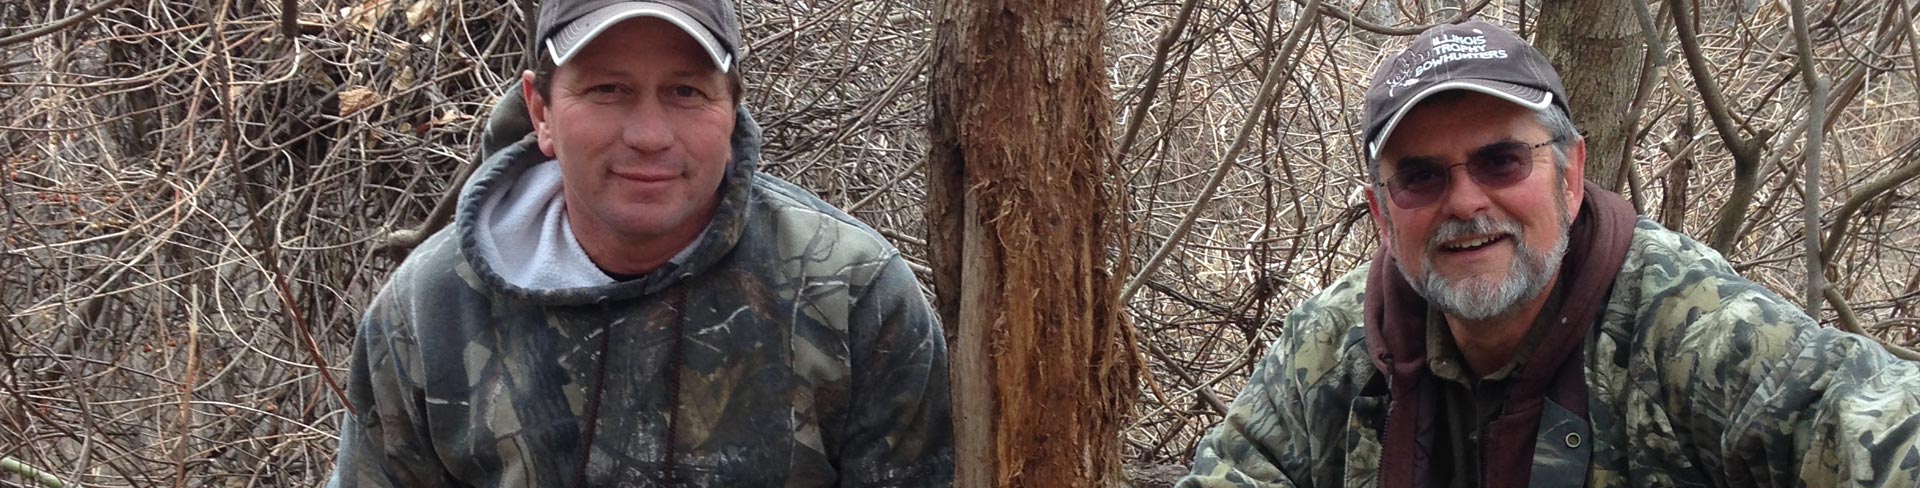 Illinois Outfitter Refrences | ITB Refrences | Deer Hunting Refrences